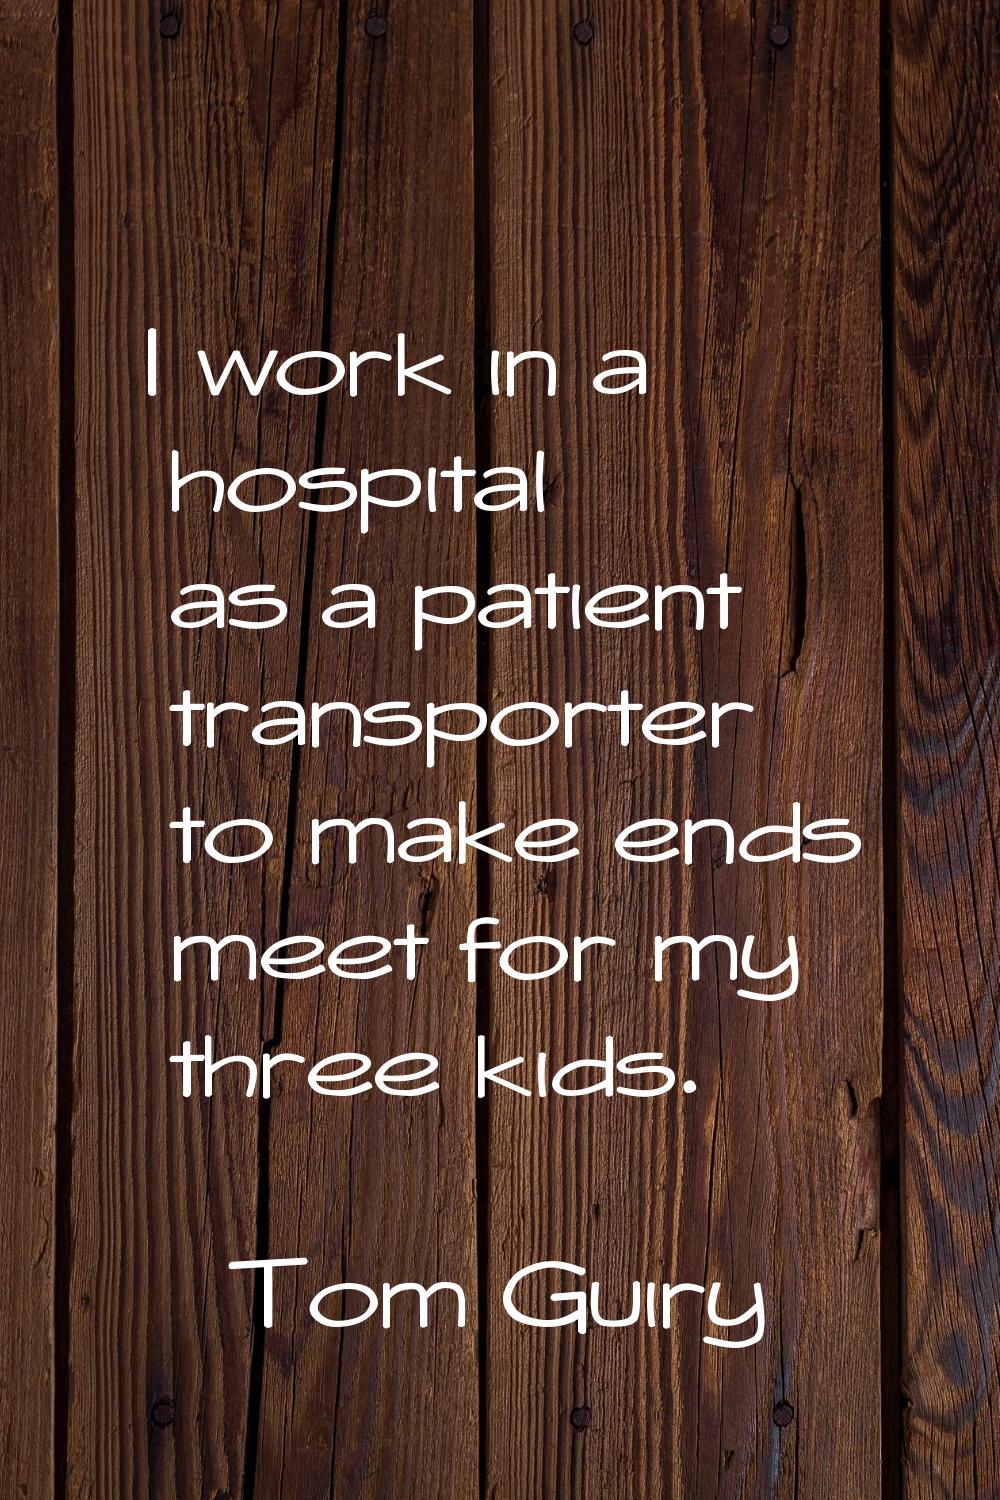 I work in a hospital as a patient transporter to make ends meet for my three kids.